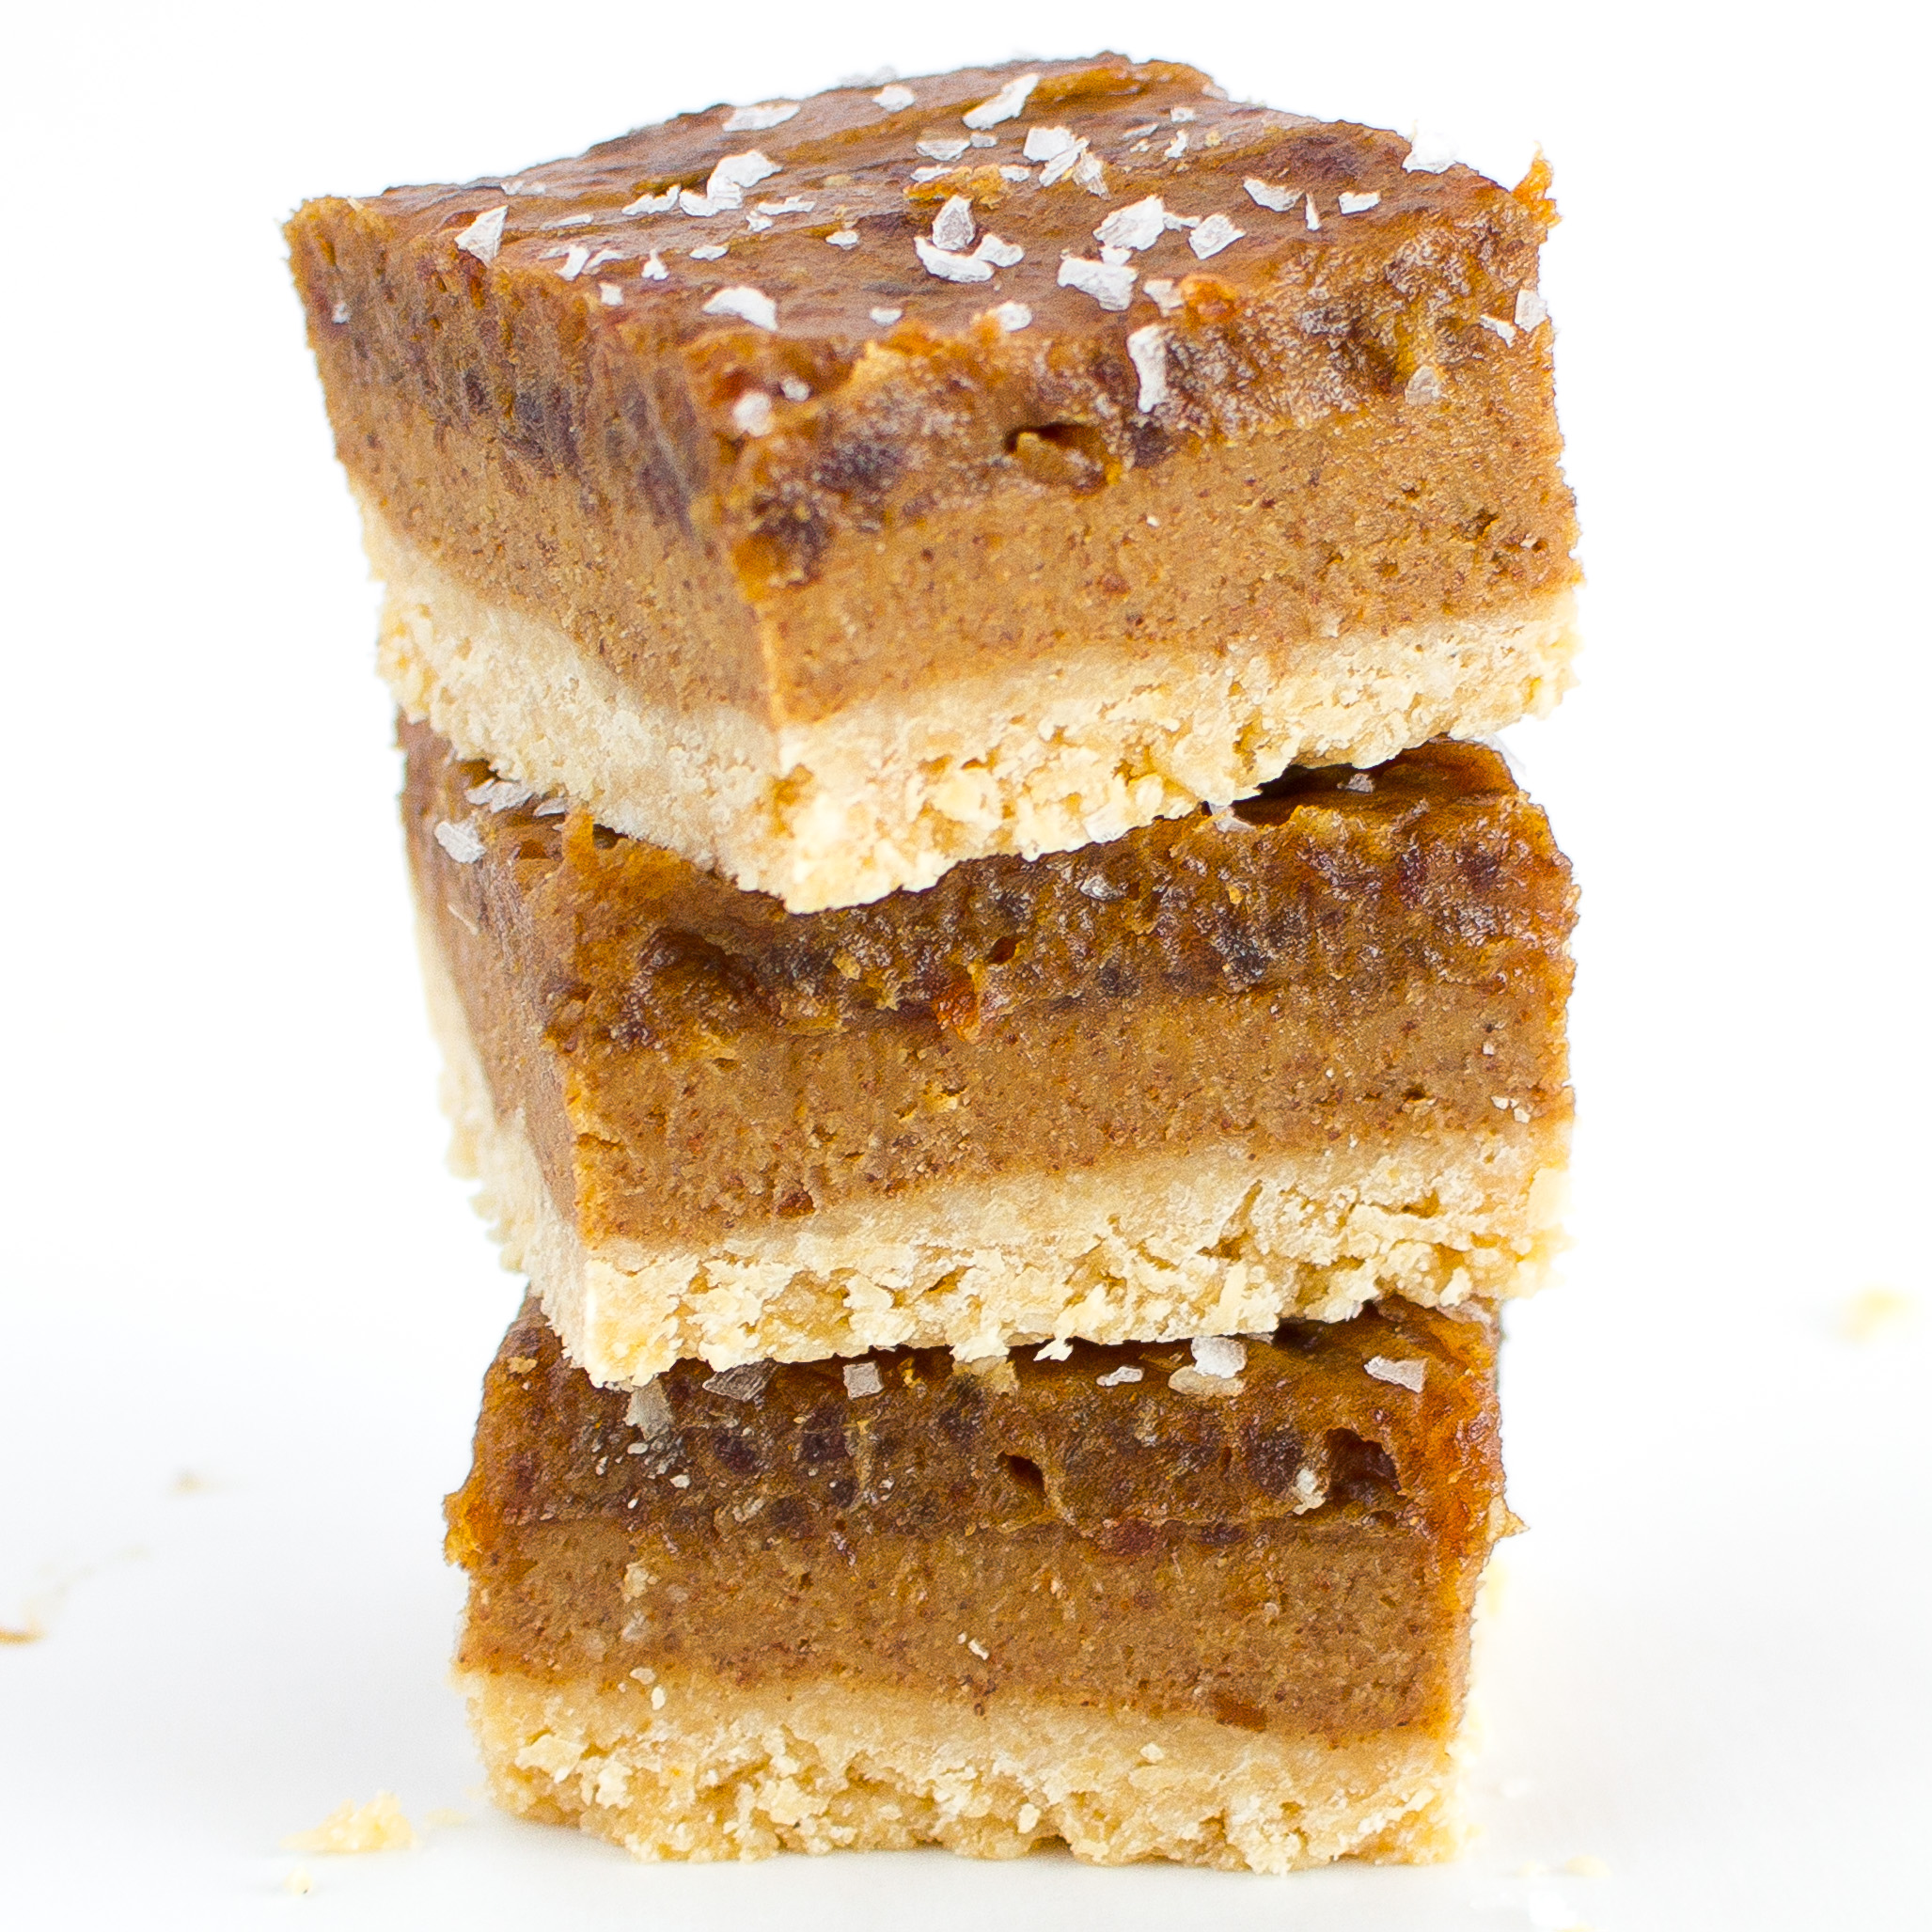 Salted Almond Date Bars